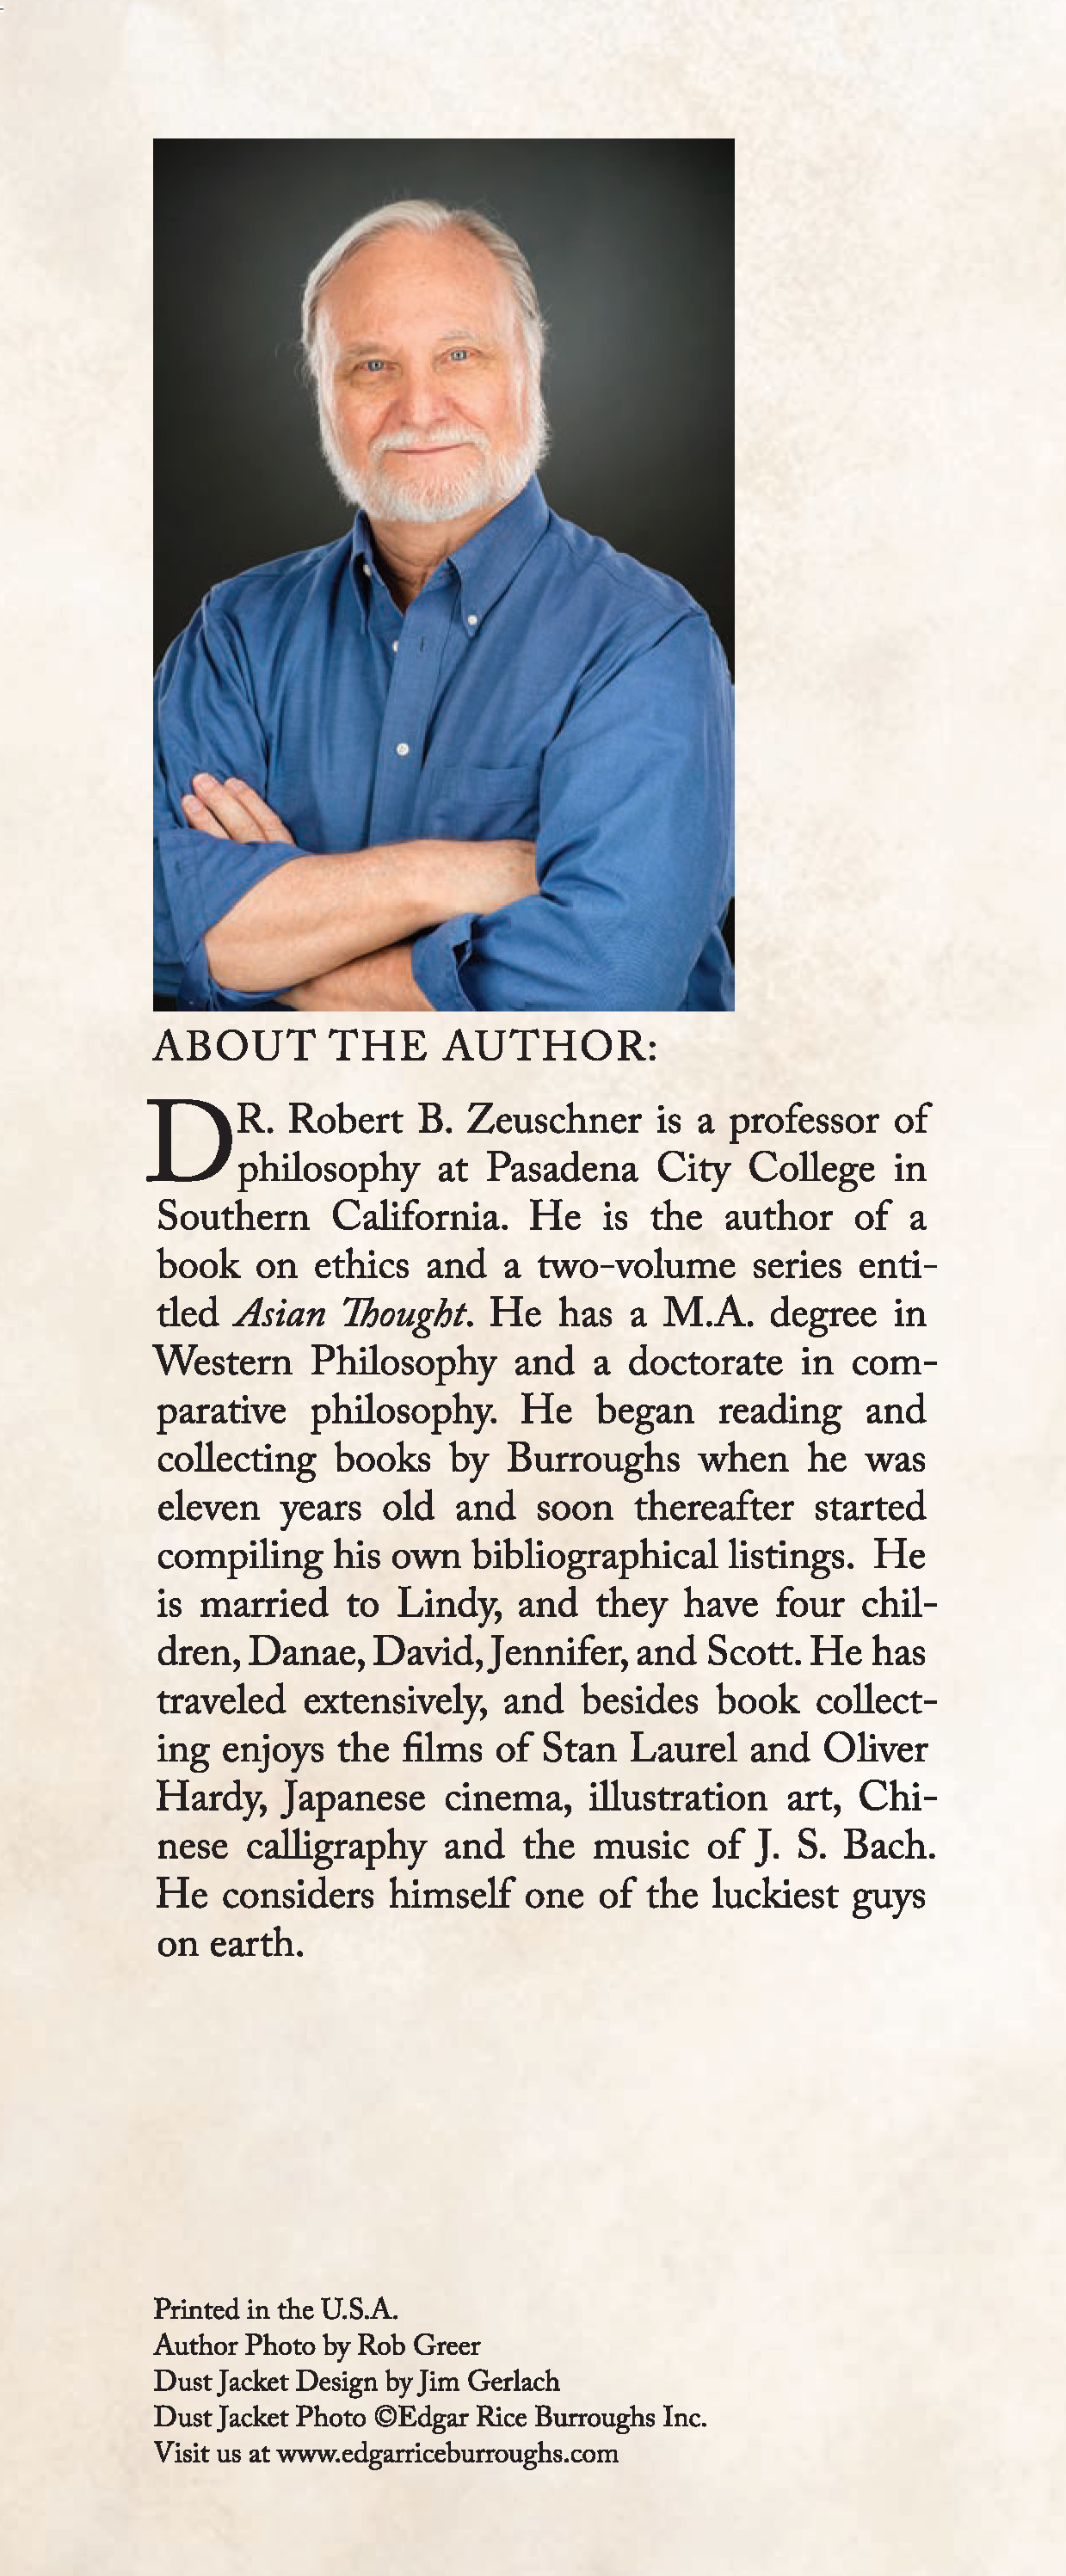 Author Robert B. Zeuschner's bio on the inside flap of the dust jacket.